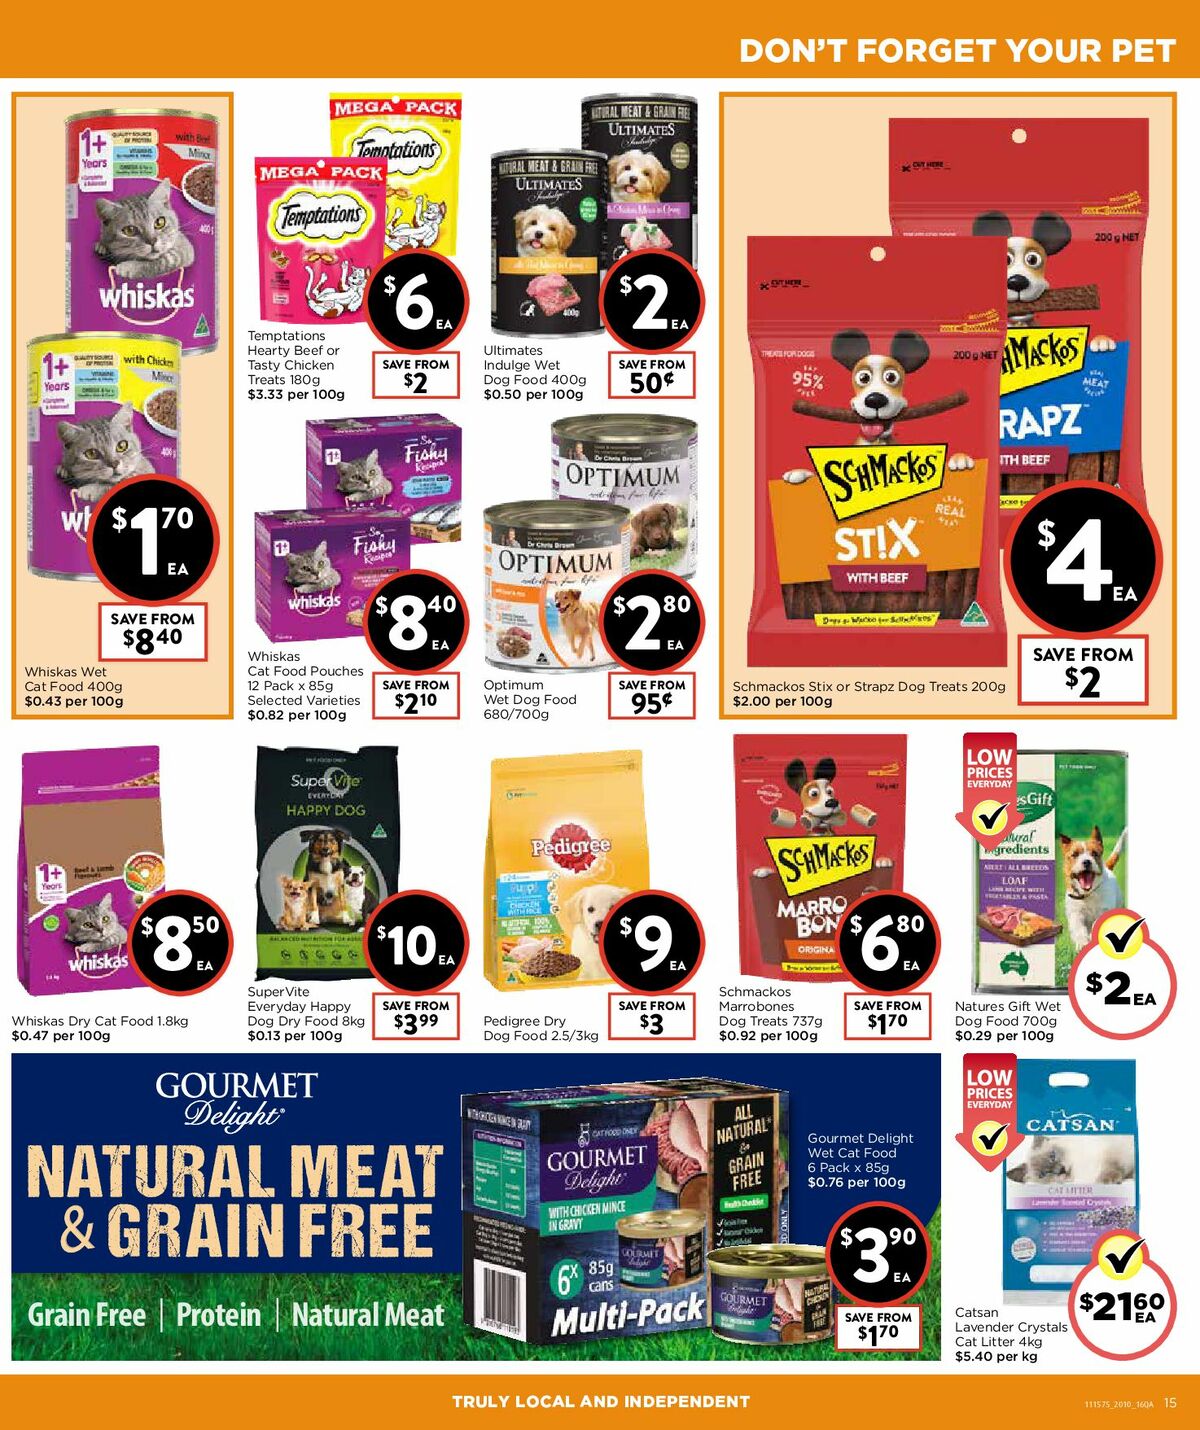 FoodWorks Supermarket Catalogues from 20 October